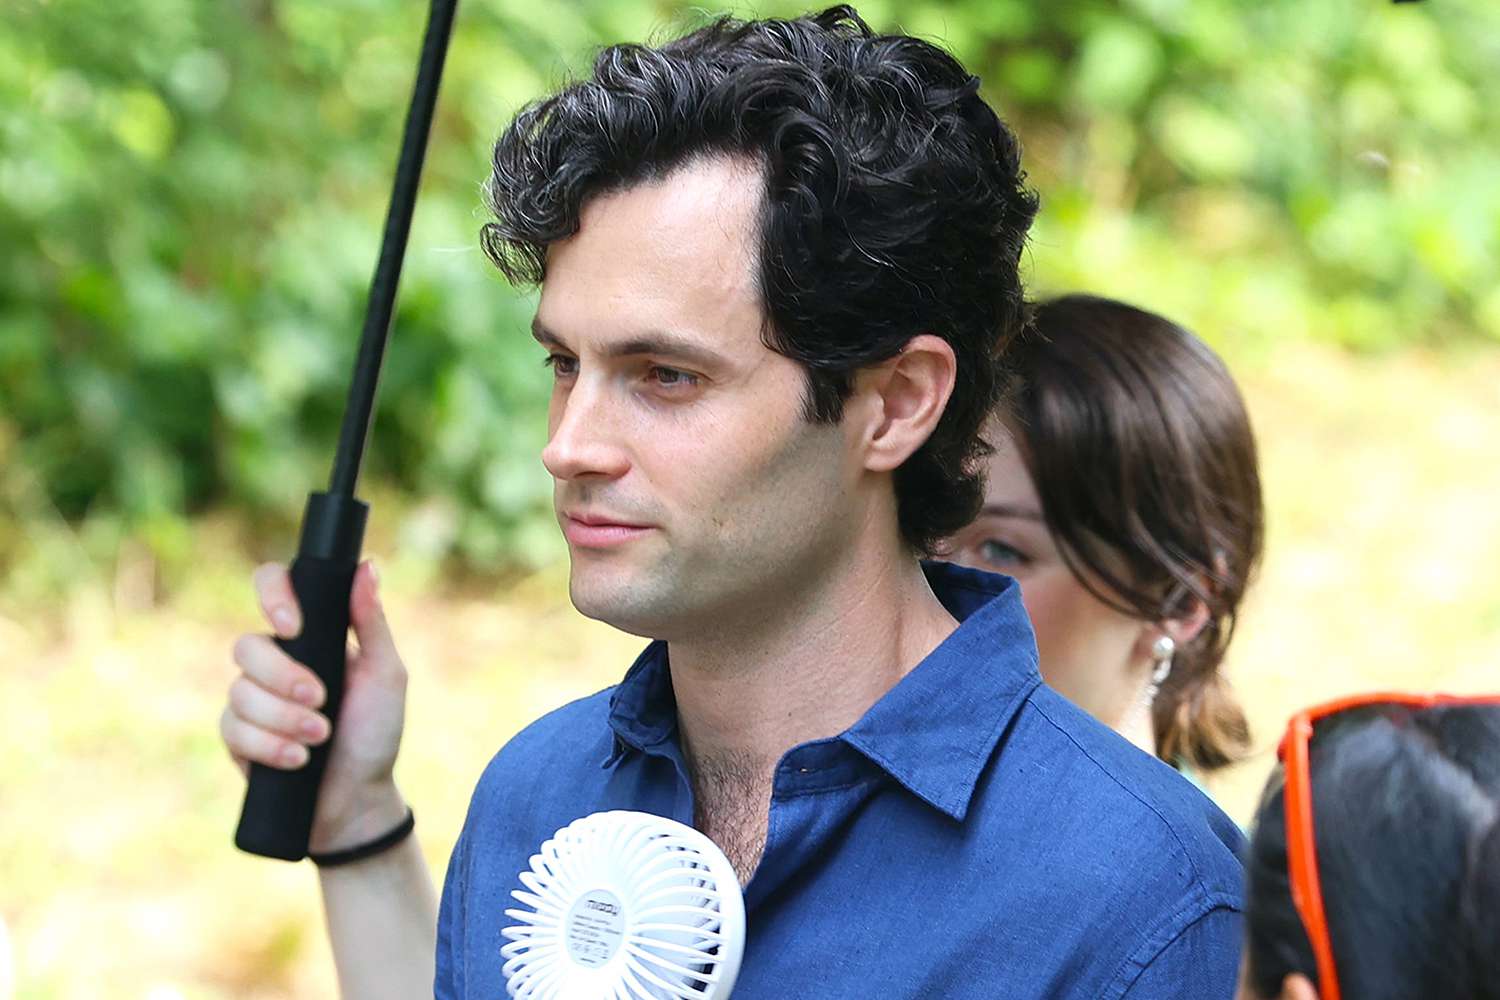 Penn Badgley Films You in New York City, Plus Zoë Kravitz and Channing Tatum, Queen Latifah and More